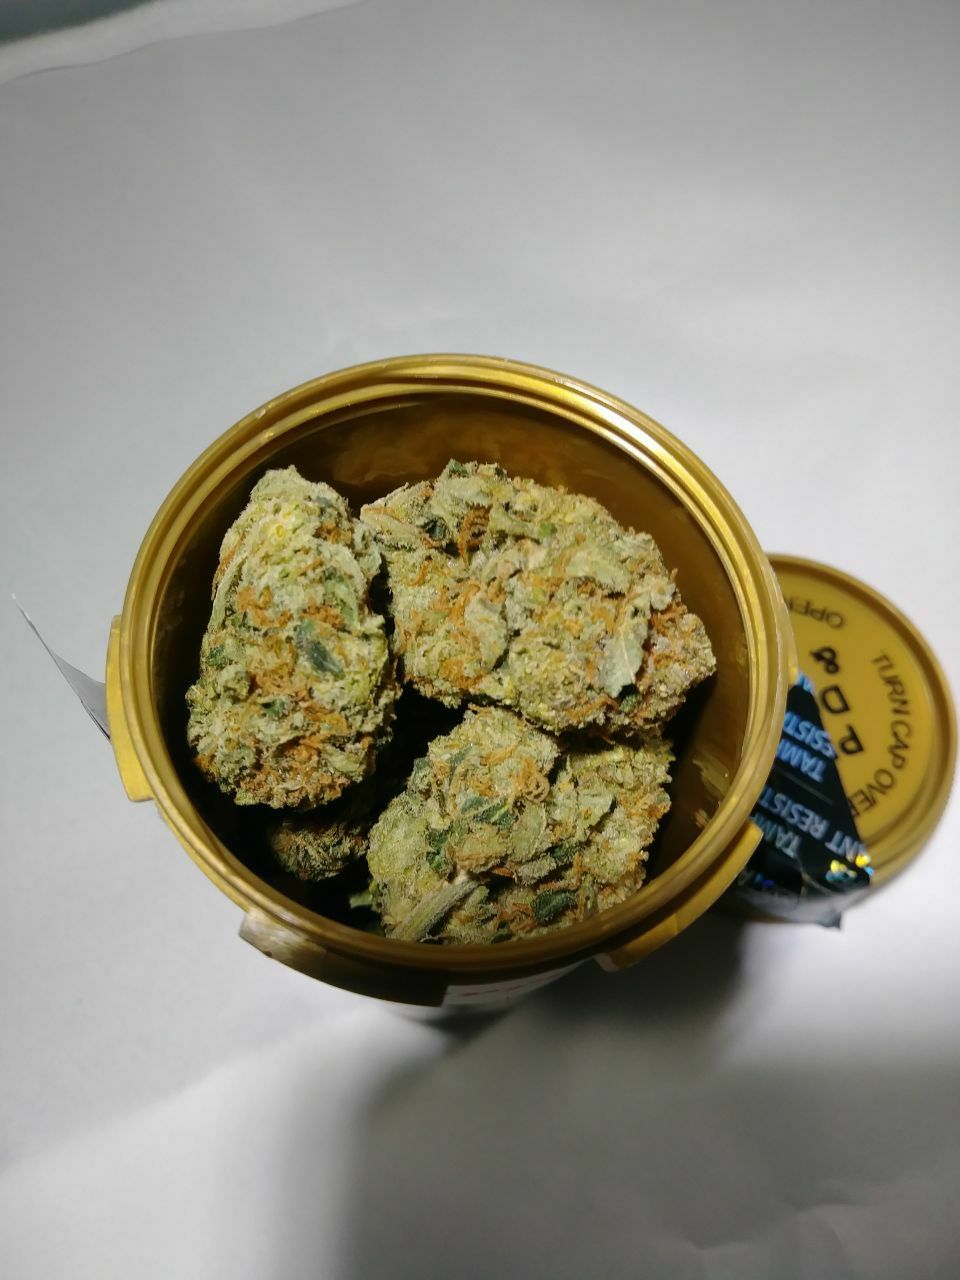 Buy Exotic Weed Strains, Psychedelics, Cocaine, Mushrooms